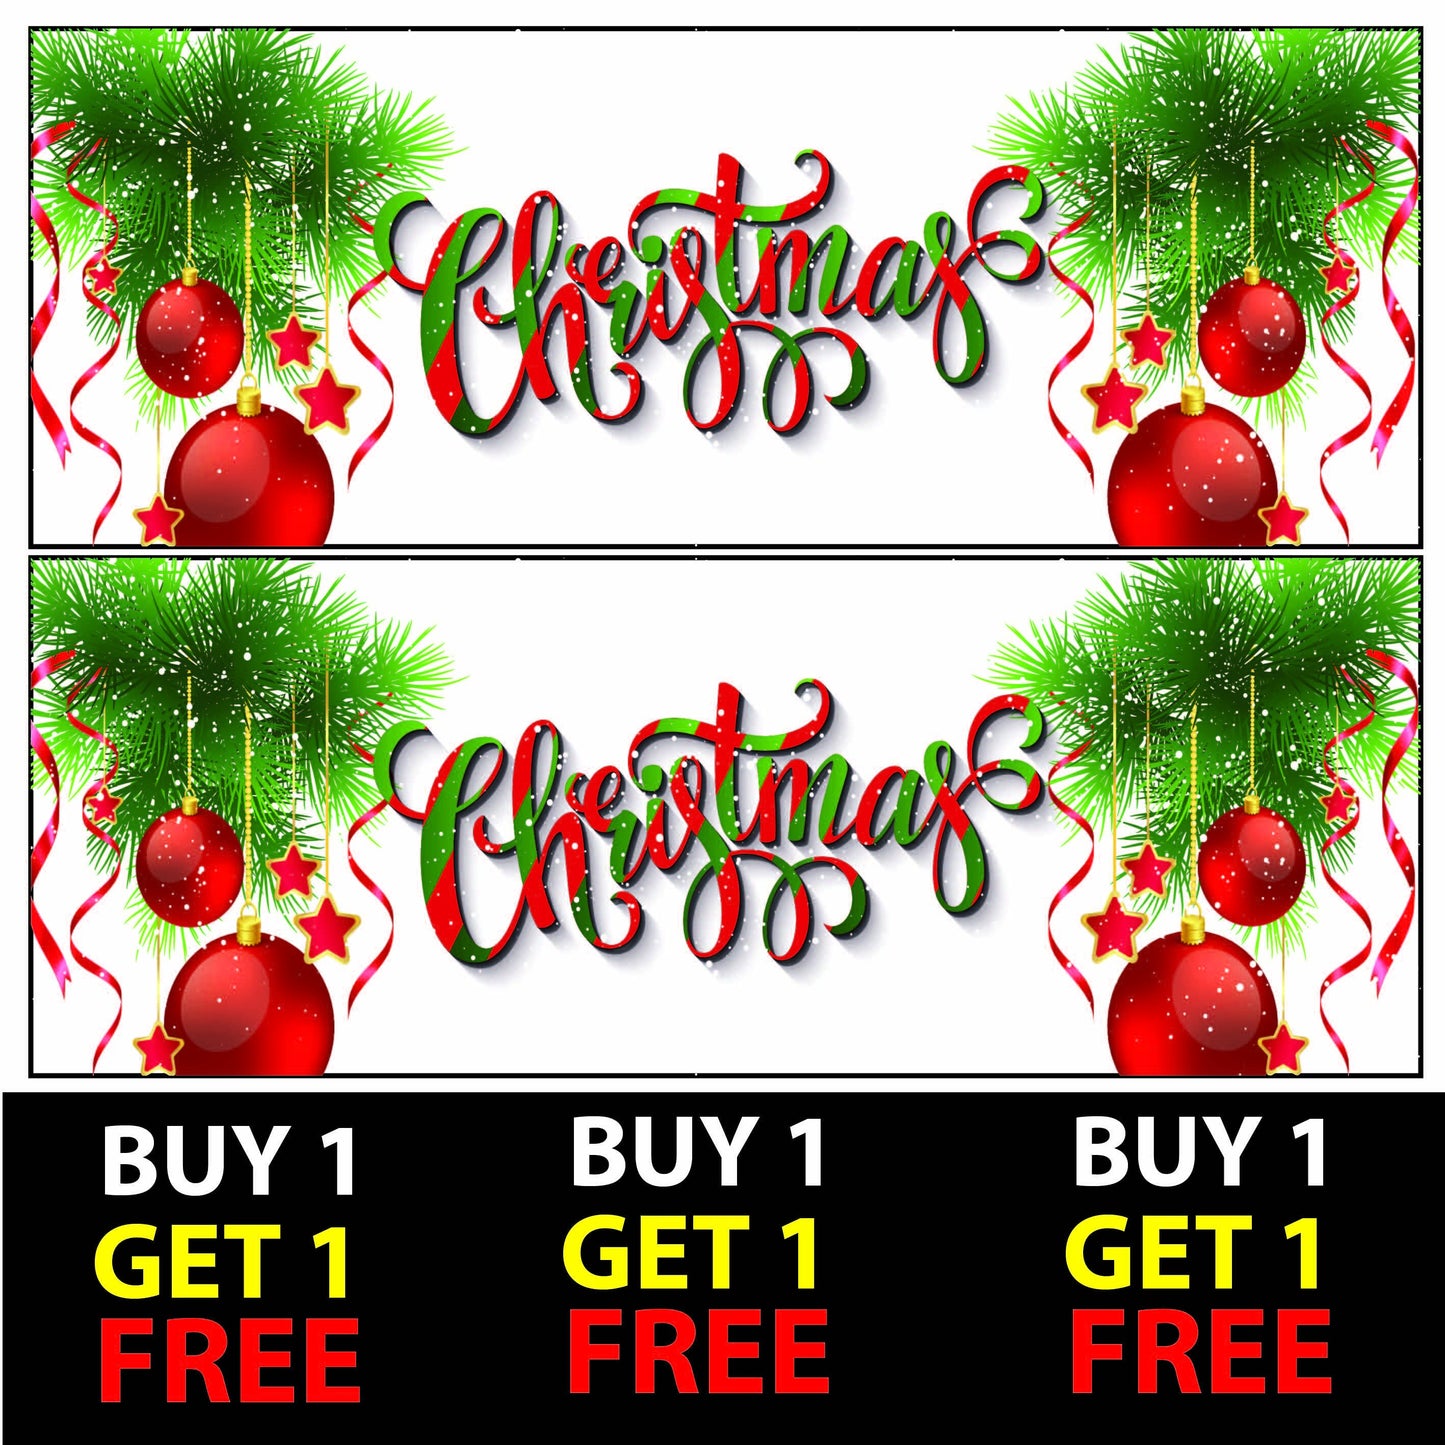 Set of 2 Personalised With Text Christmas V10 Banners Xmas Party Celebration Occasion